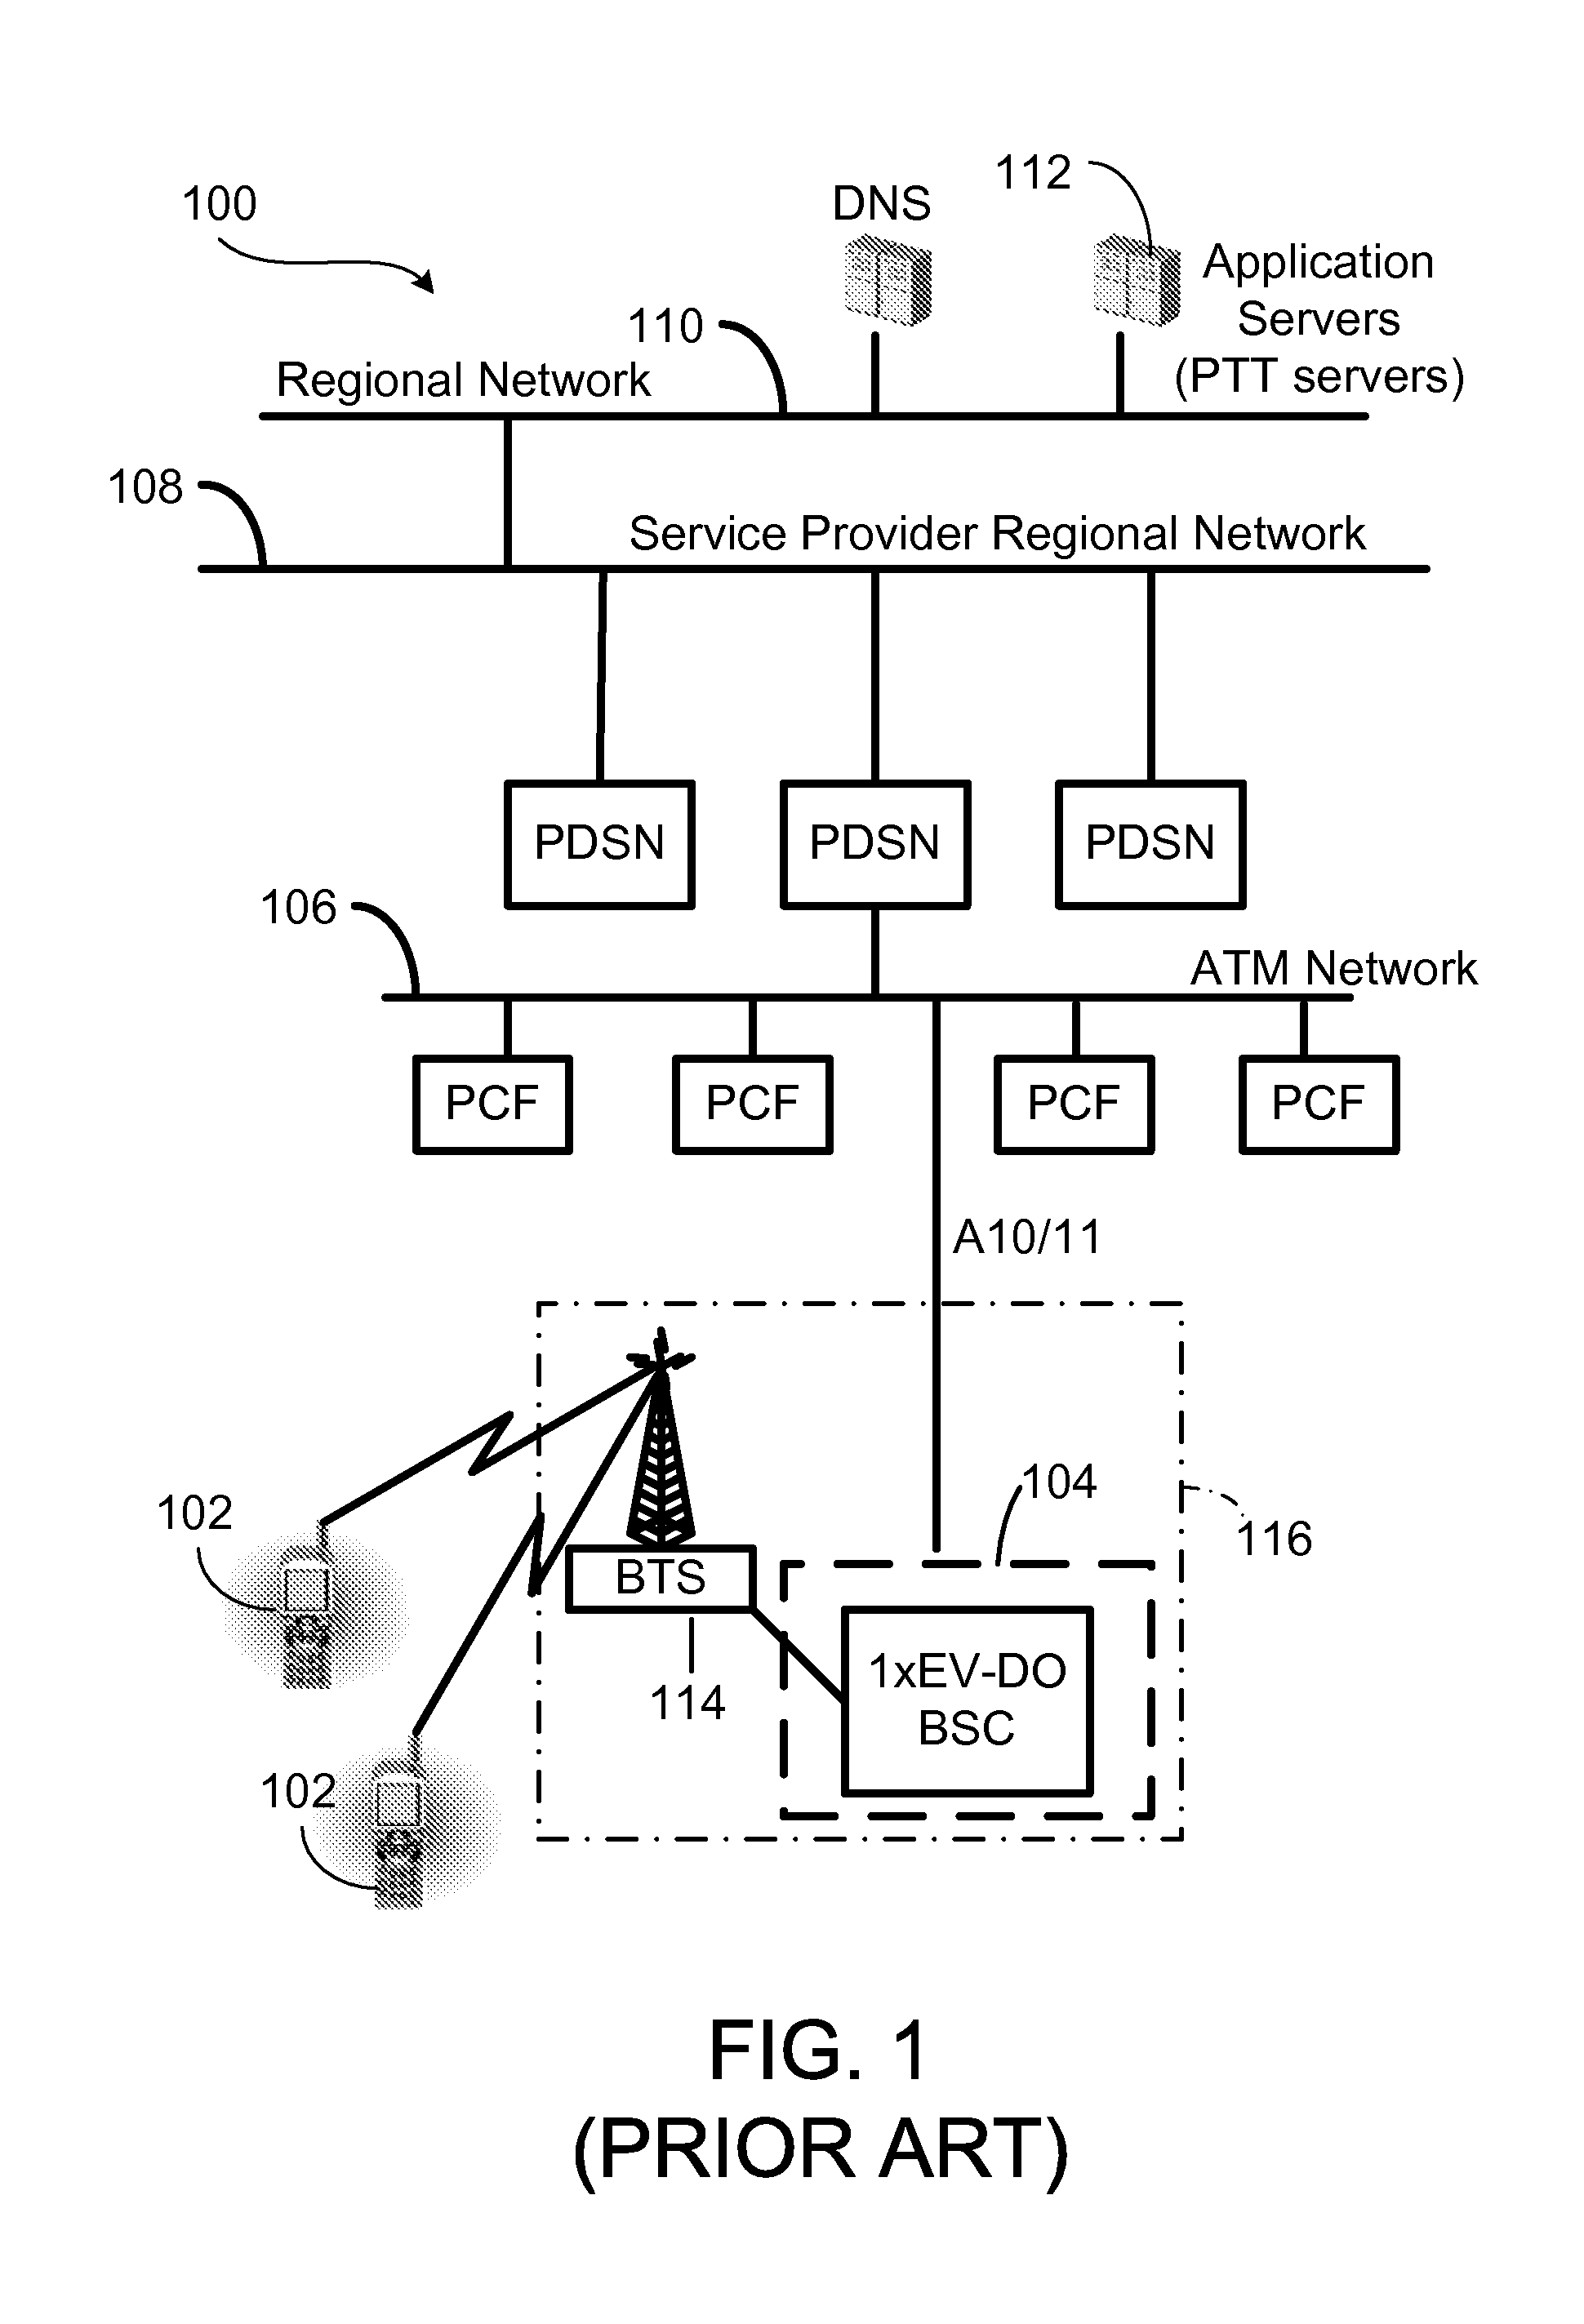 Method and apparatus for adaptive dynamic call setup based on real-time network resource availability